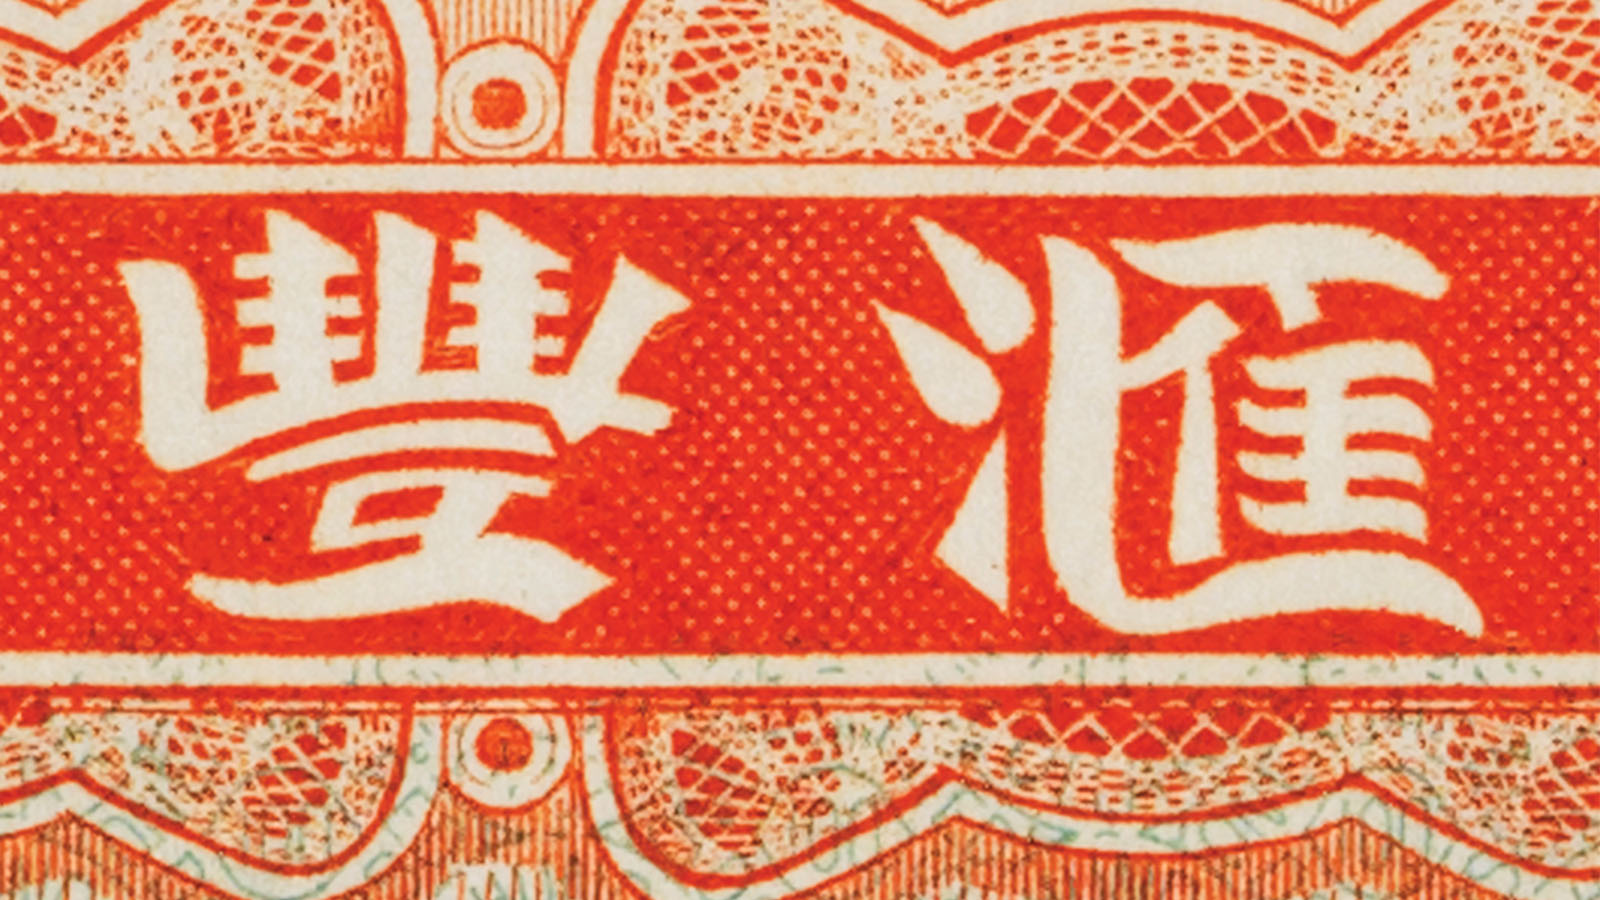 The bank’s Chinese name, ‘Wayfoong’, printed on an early HSBC banknote